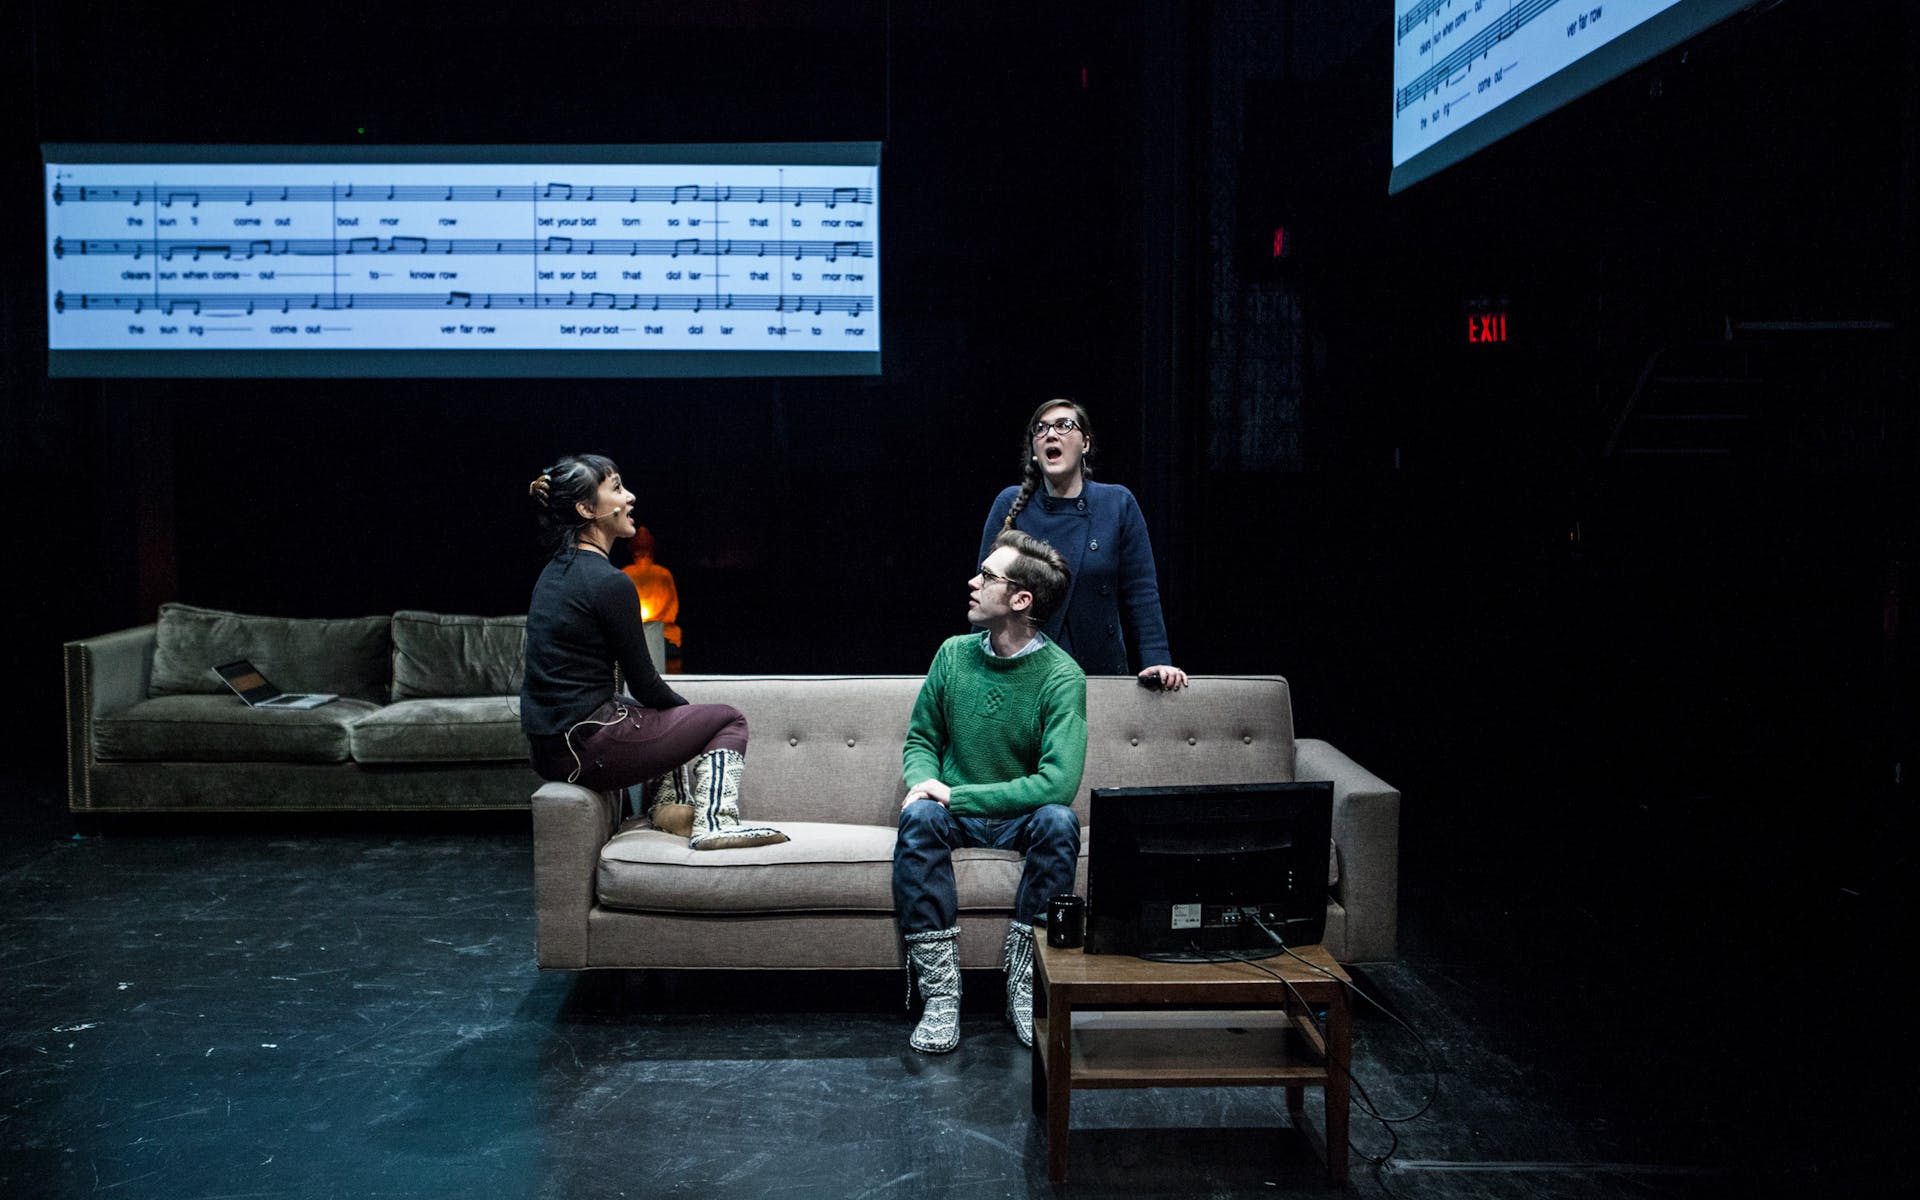 Three people sitting on a stage on a couch with musical notation projected in the background